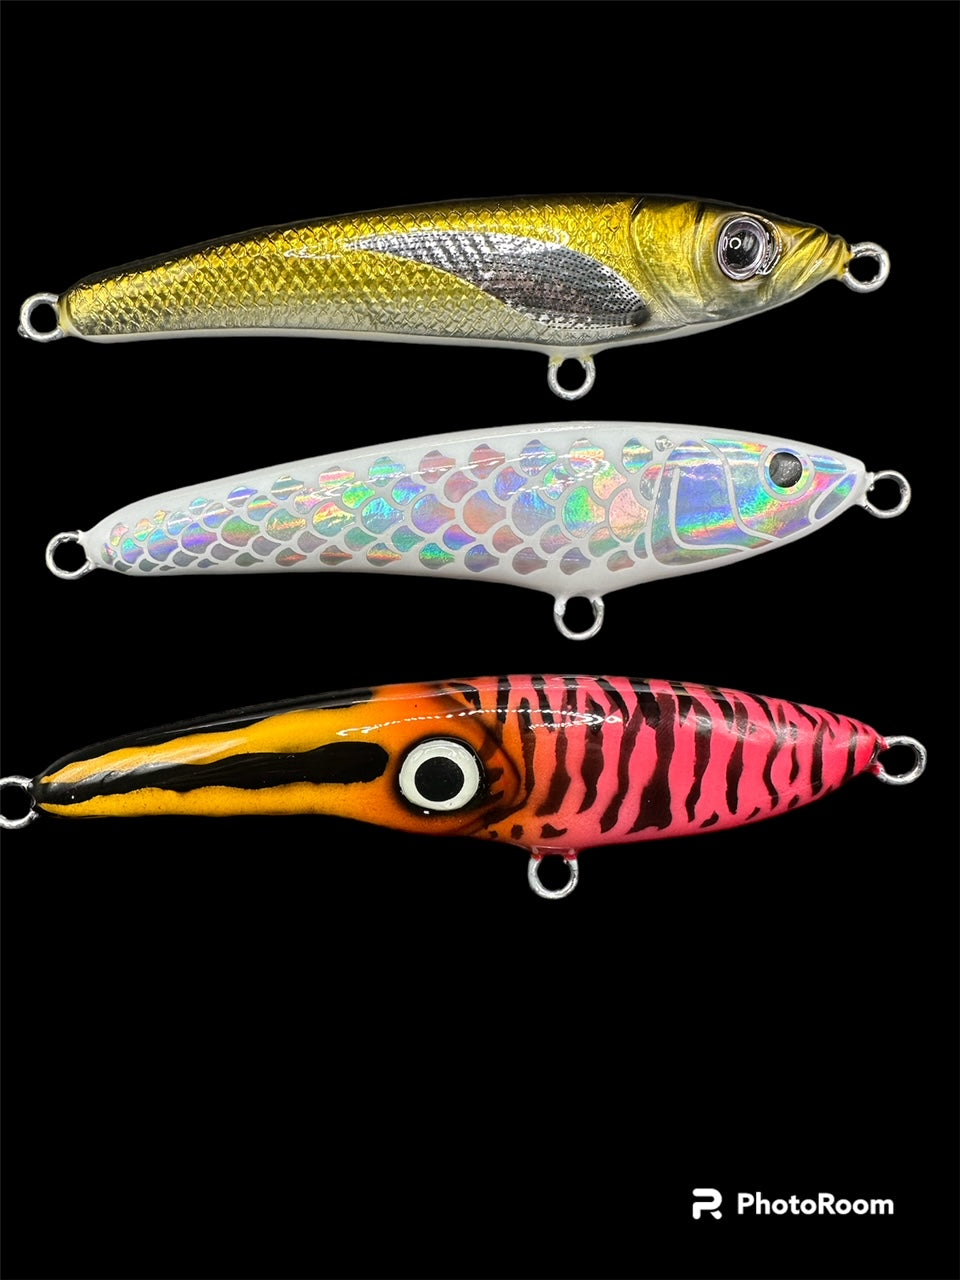 wood stick baits, wood stick baits Suppliers and Manufacturers at